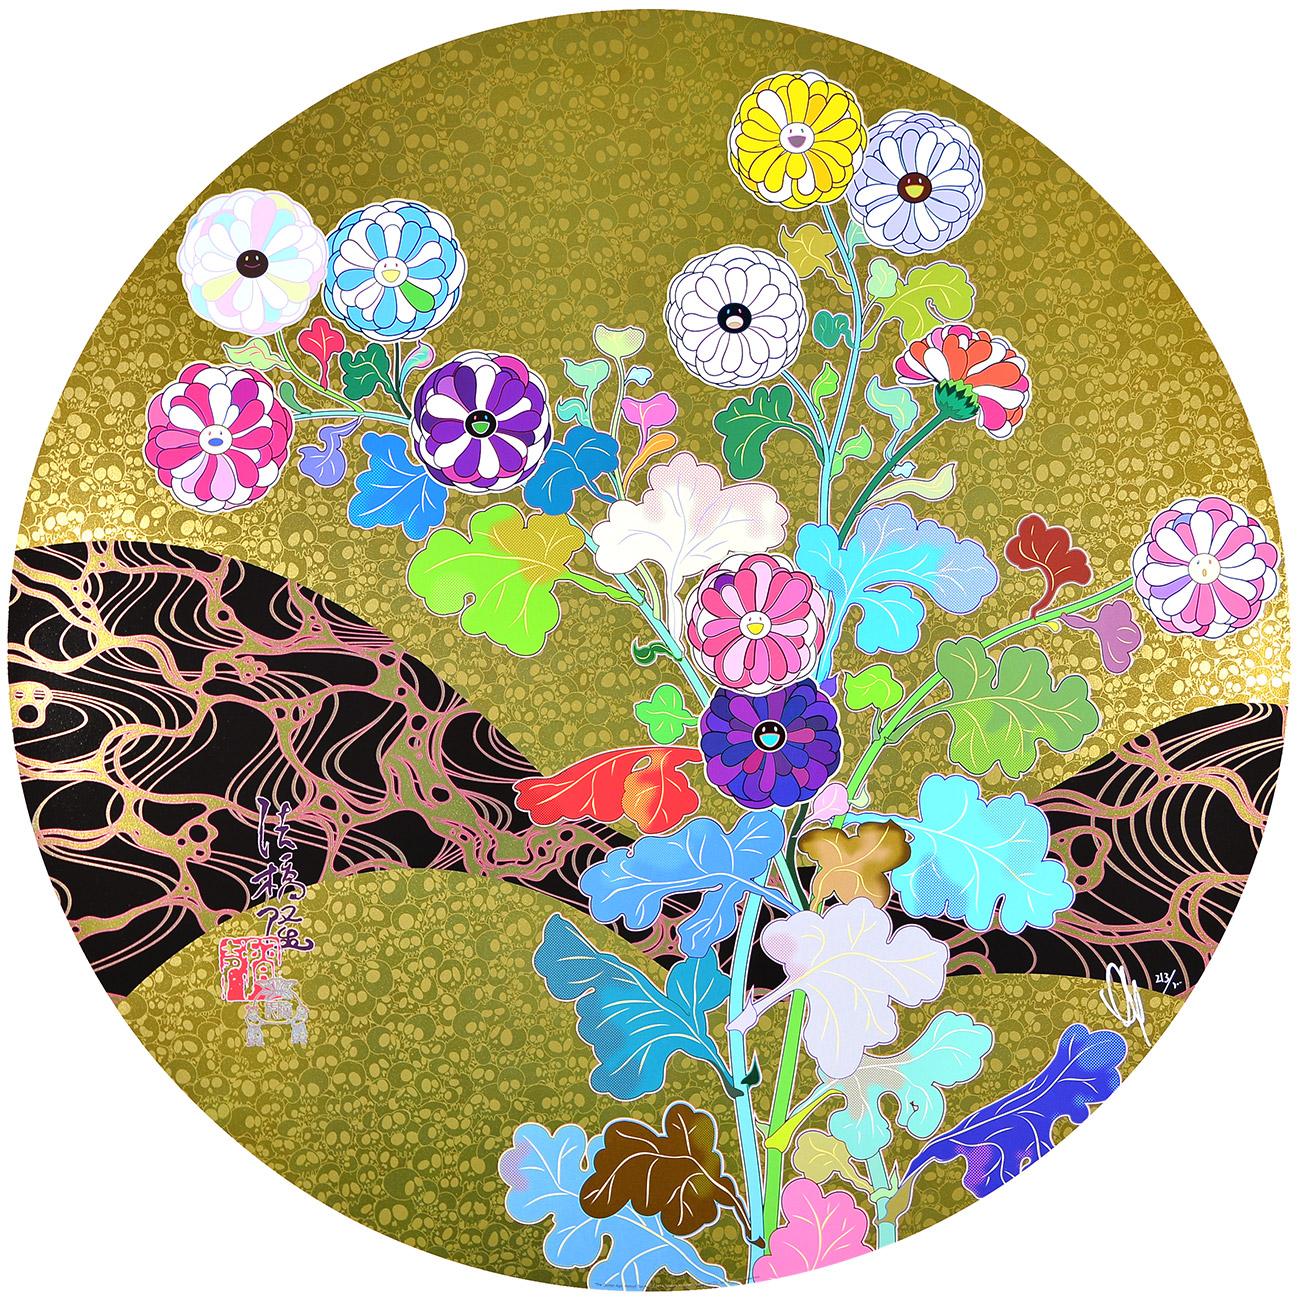 Takashi Murakami - THE GOLDEN AGE: HOKKYO TAKASHI
Date of creation: 2016
Medium: Offset lithograph with cold stamp and high gloss varnish on paper
Edition: 213/300
Size: 71 cm Ø
Condition: Brand new, in mint conditions and never framed
Observations: